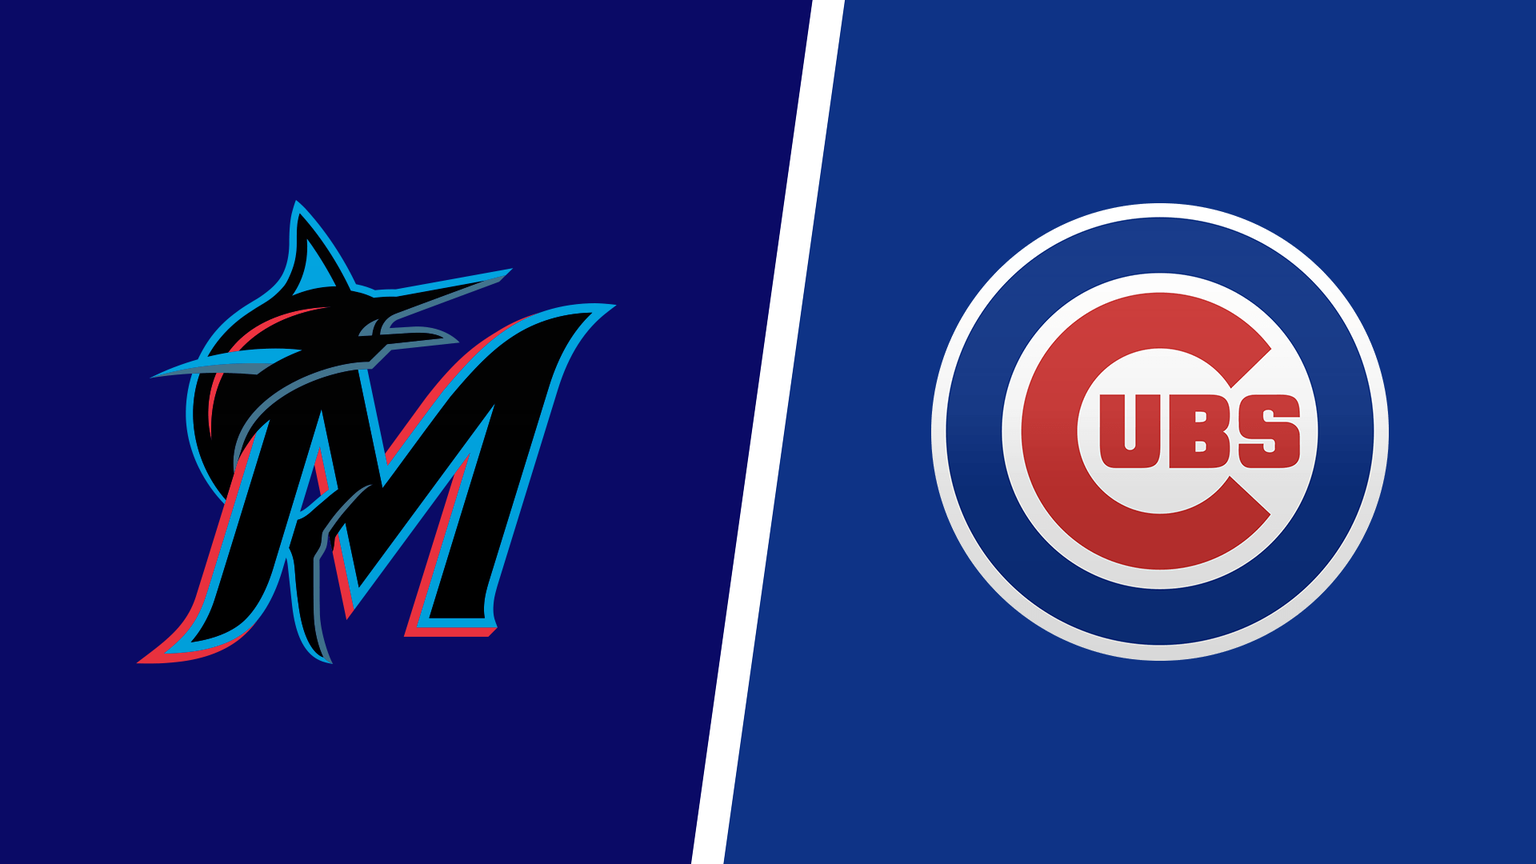 How to Watch Chicago Cubs vs. Miami Marlins Live Online Without Cable